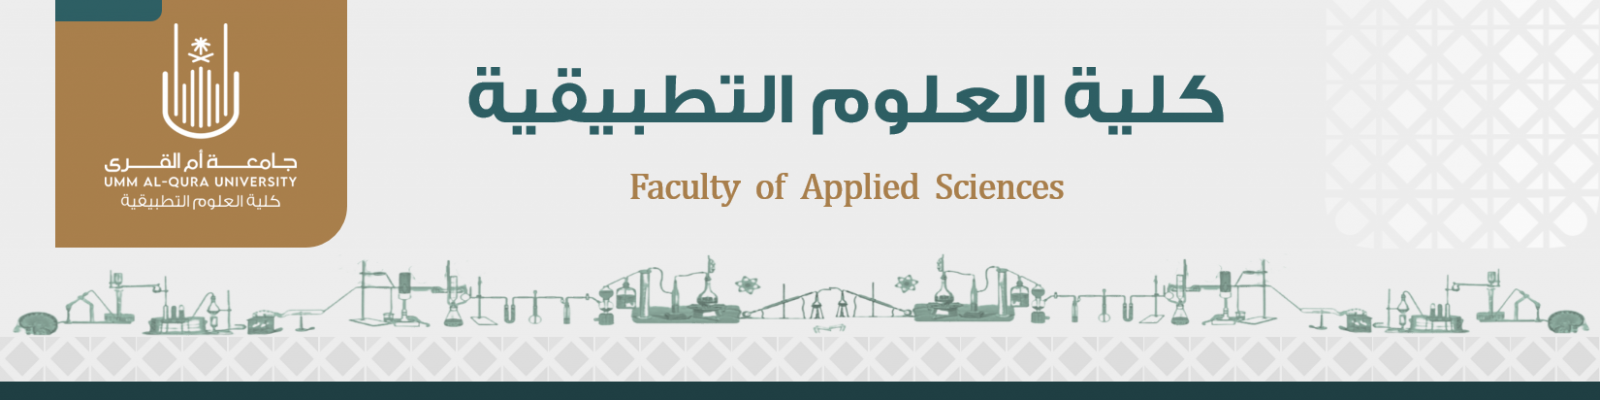 College of Applied Sciences